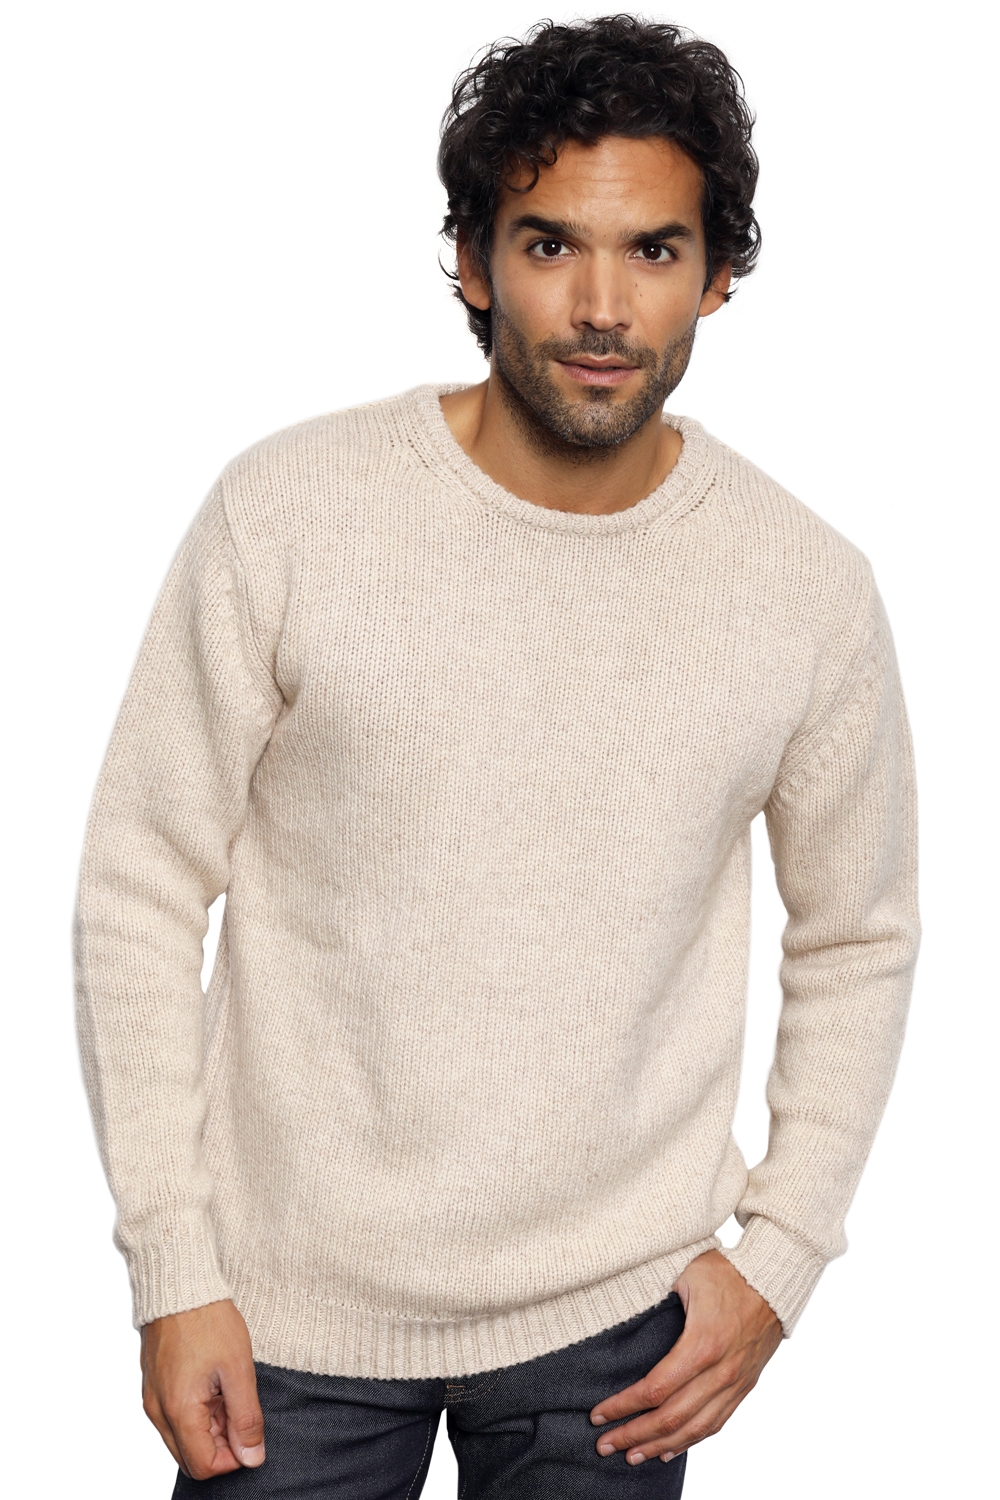 Chameau pull homme cole nature 4xl